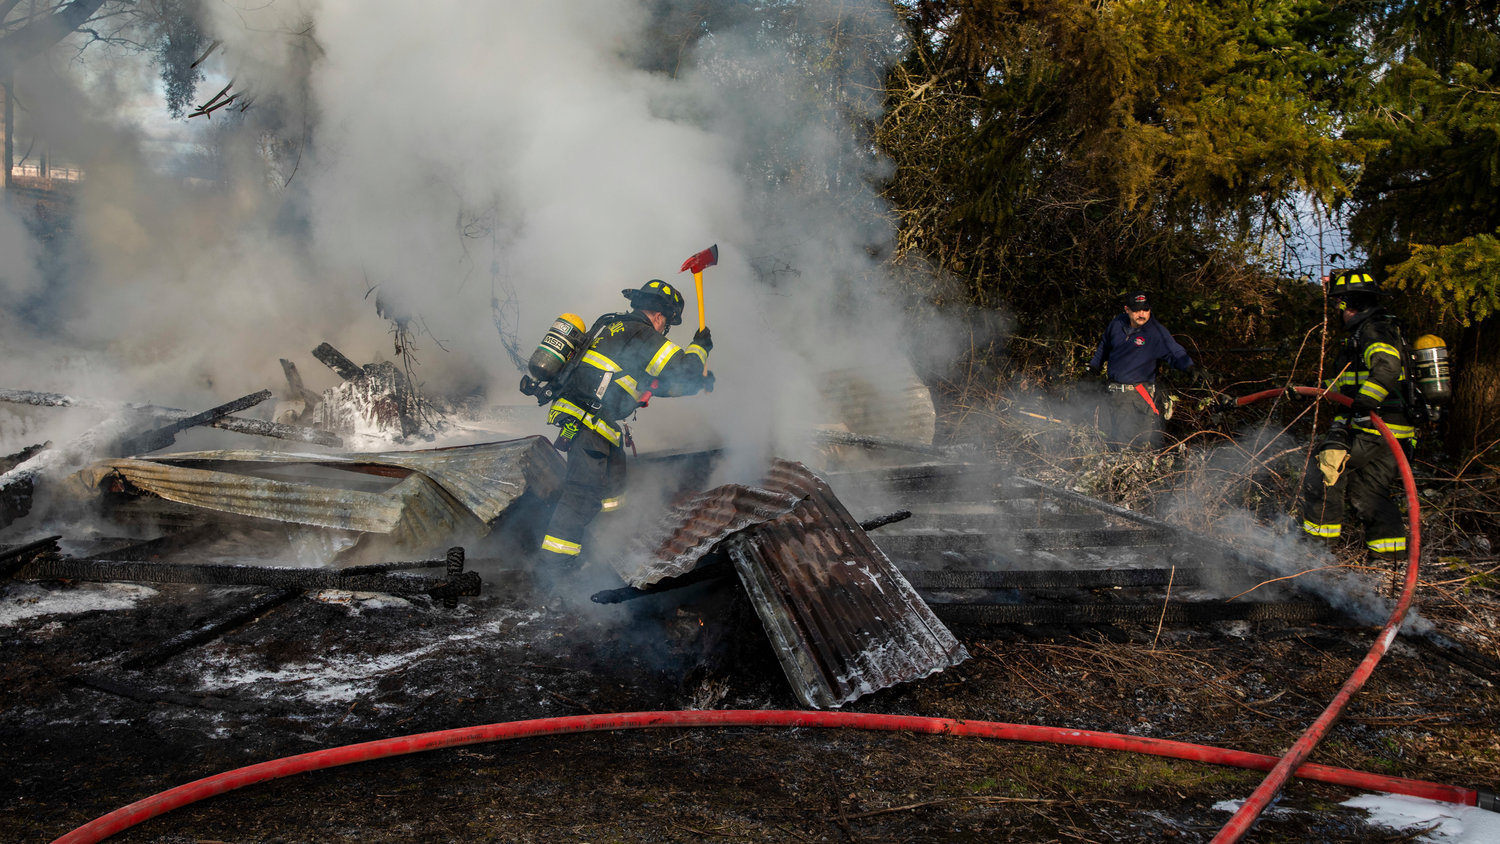 Captain Casey McCarthy, with Riverside Fire Authority, uses an ax to break down debris after flames destroyed an outbuilding that was supposed to be unoccupied along Long Road in Centralia Thursday morning.